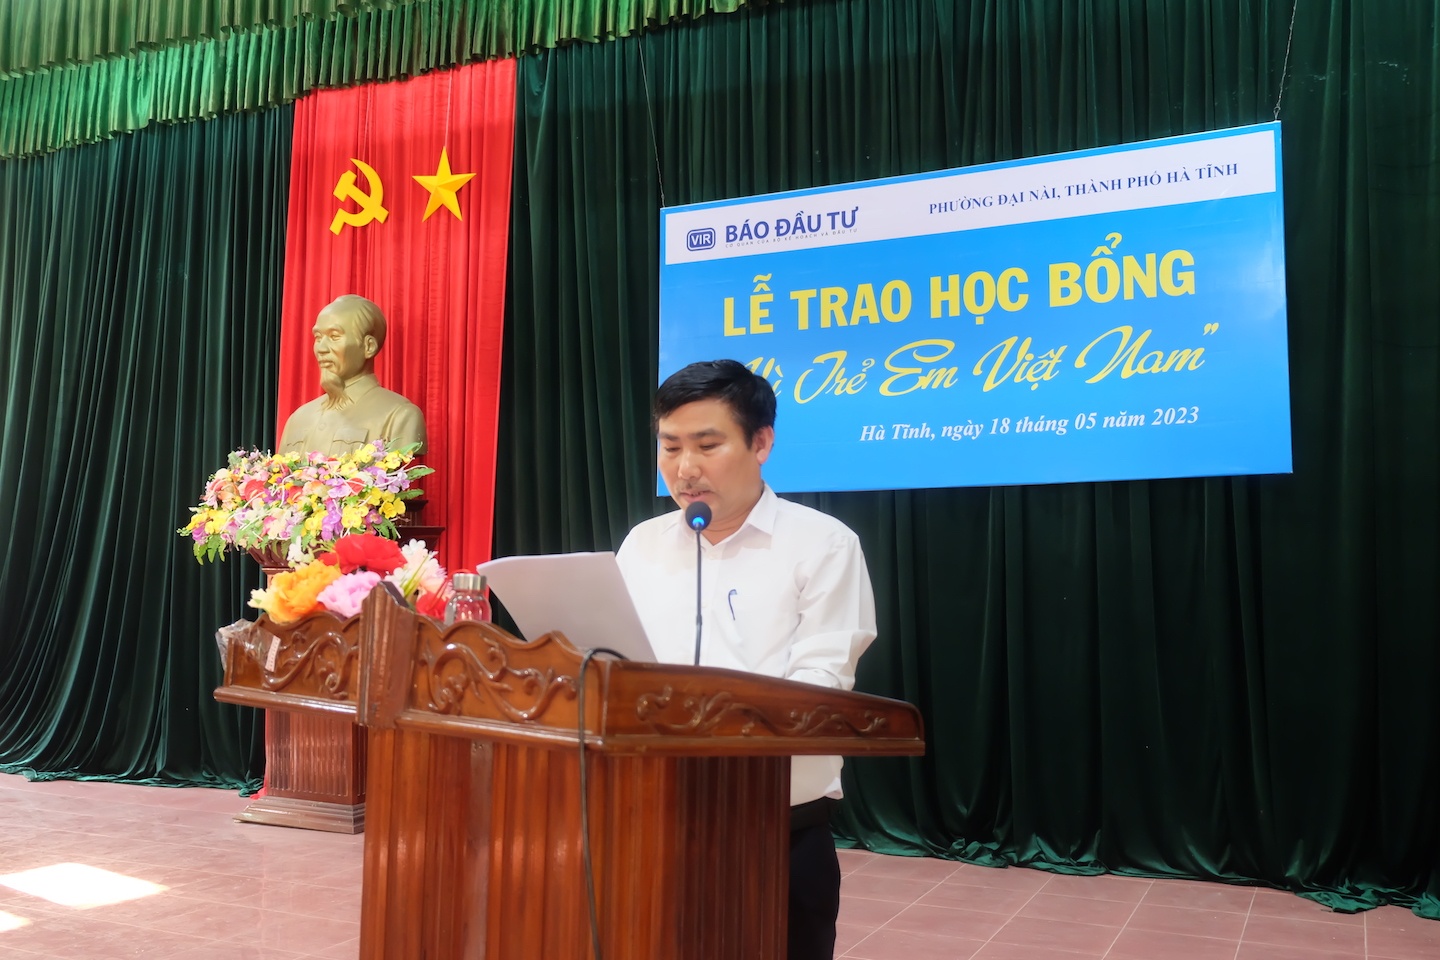 Underprivileged students supported in Ha Tinh and Nghe An